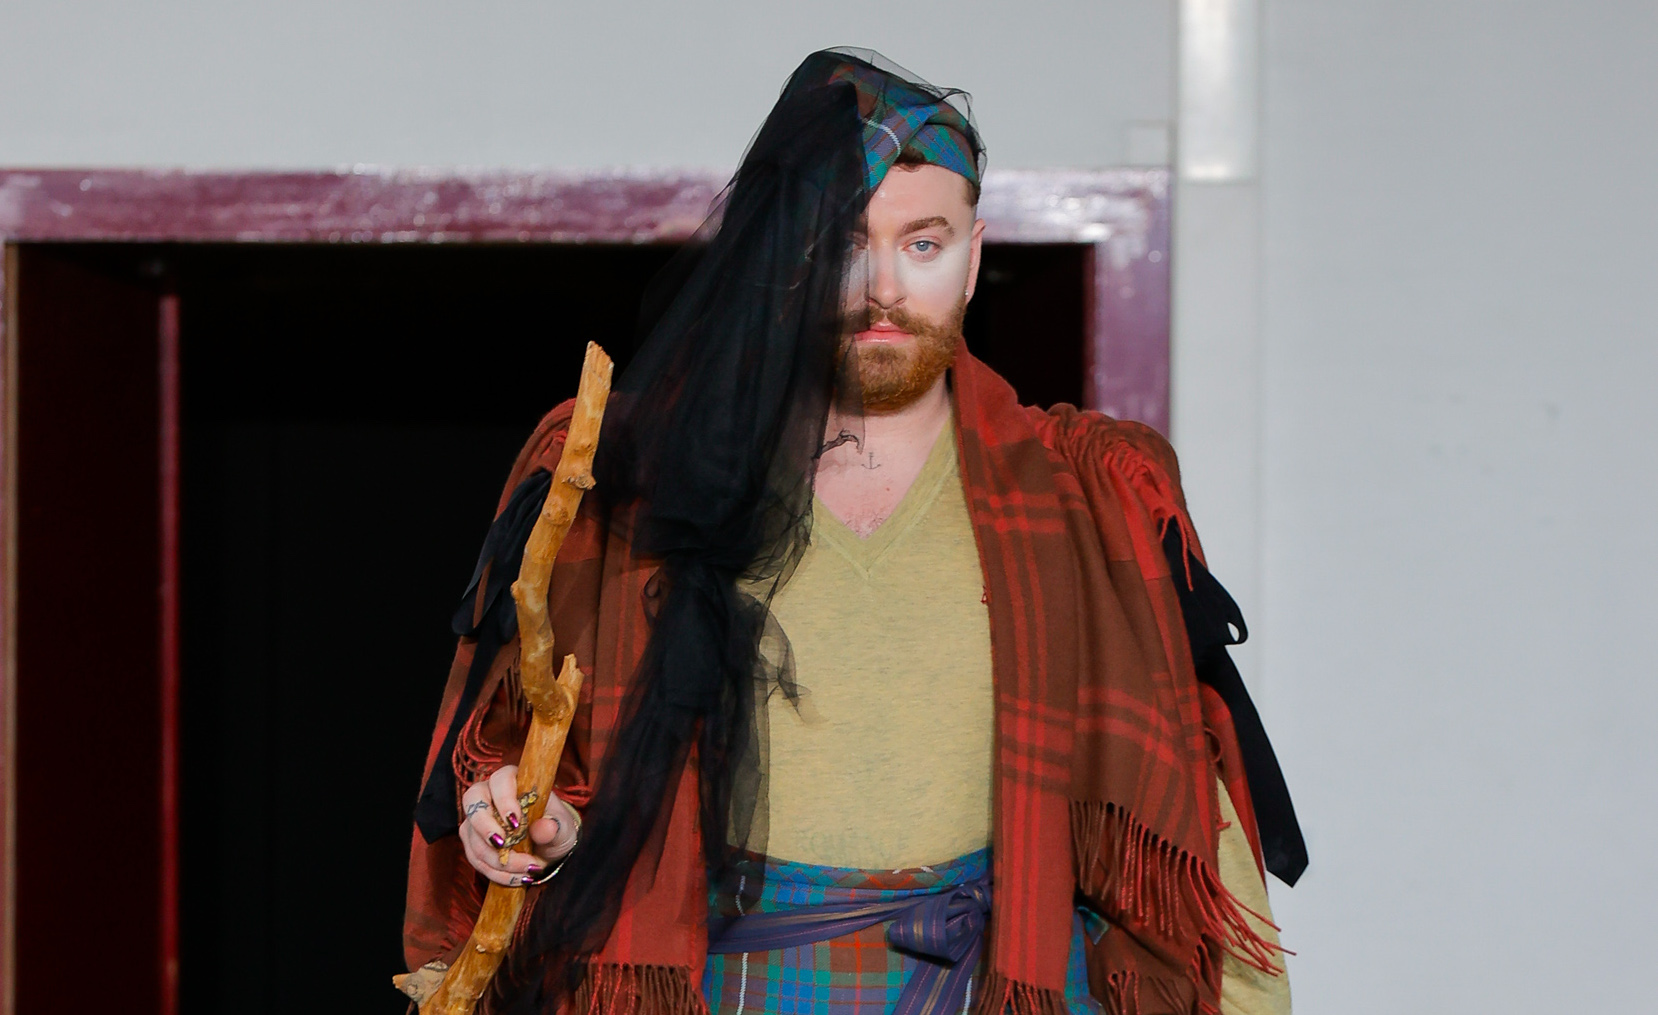 Sam Smith strides confidently on the runway in a vibrant, eclectic ensemble featuring plaid patterns and a rustic staff, at the Andreas Kronthaler for Vivienne Westwood AW24 show.